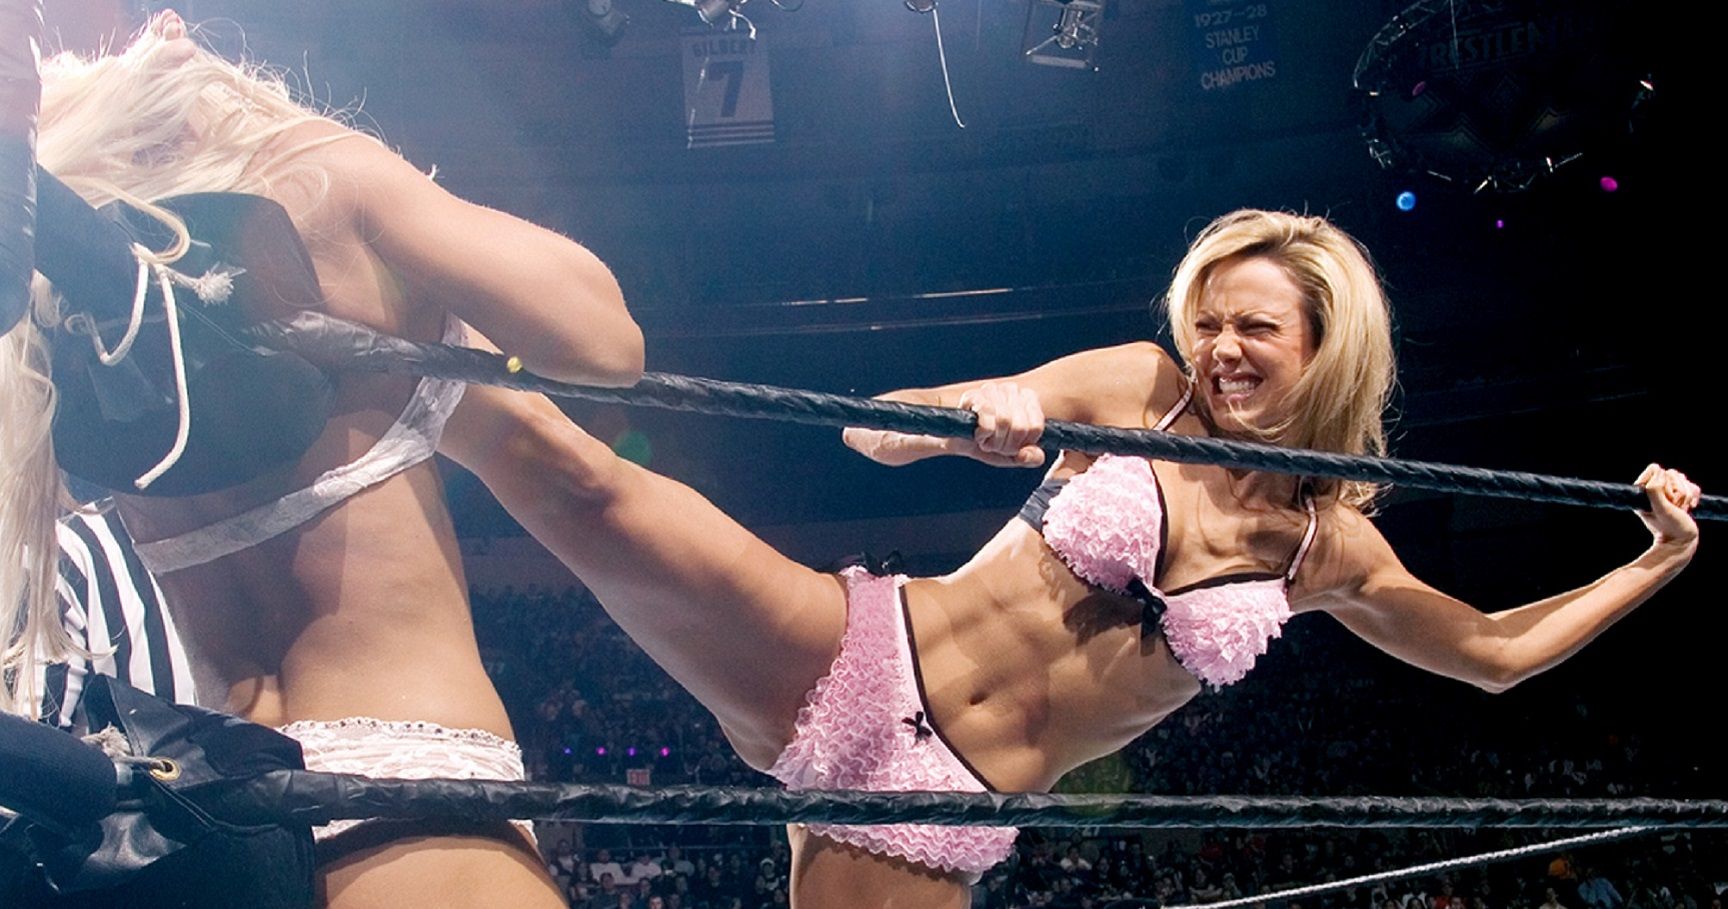 andrea miller rice recommends wwe divas strip match pic